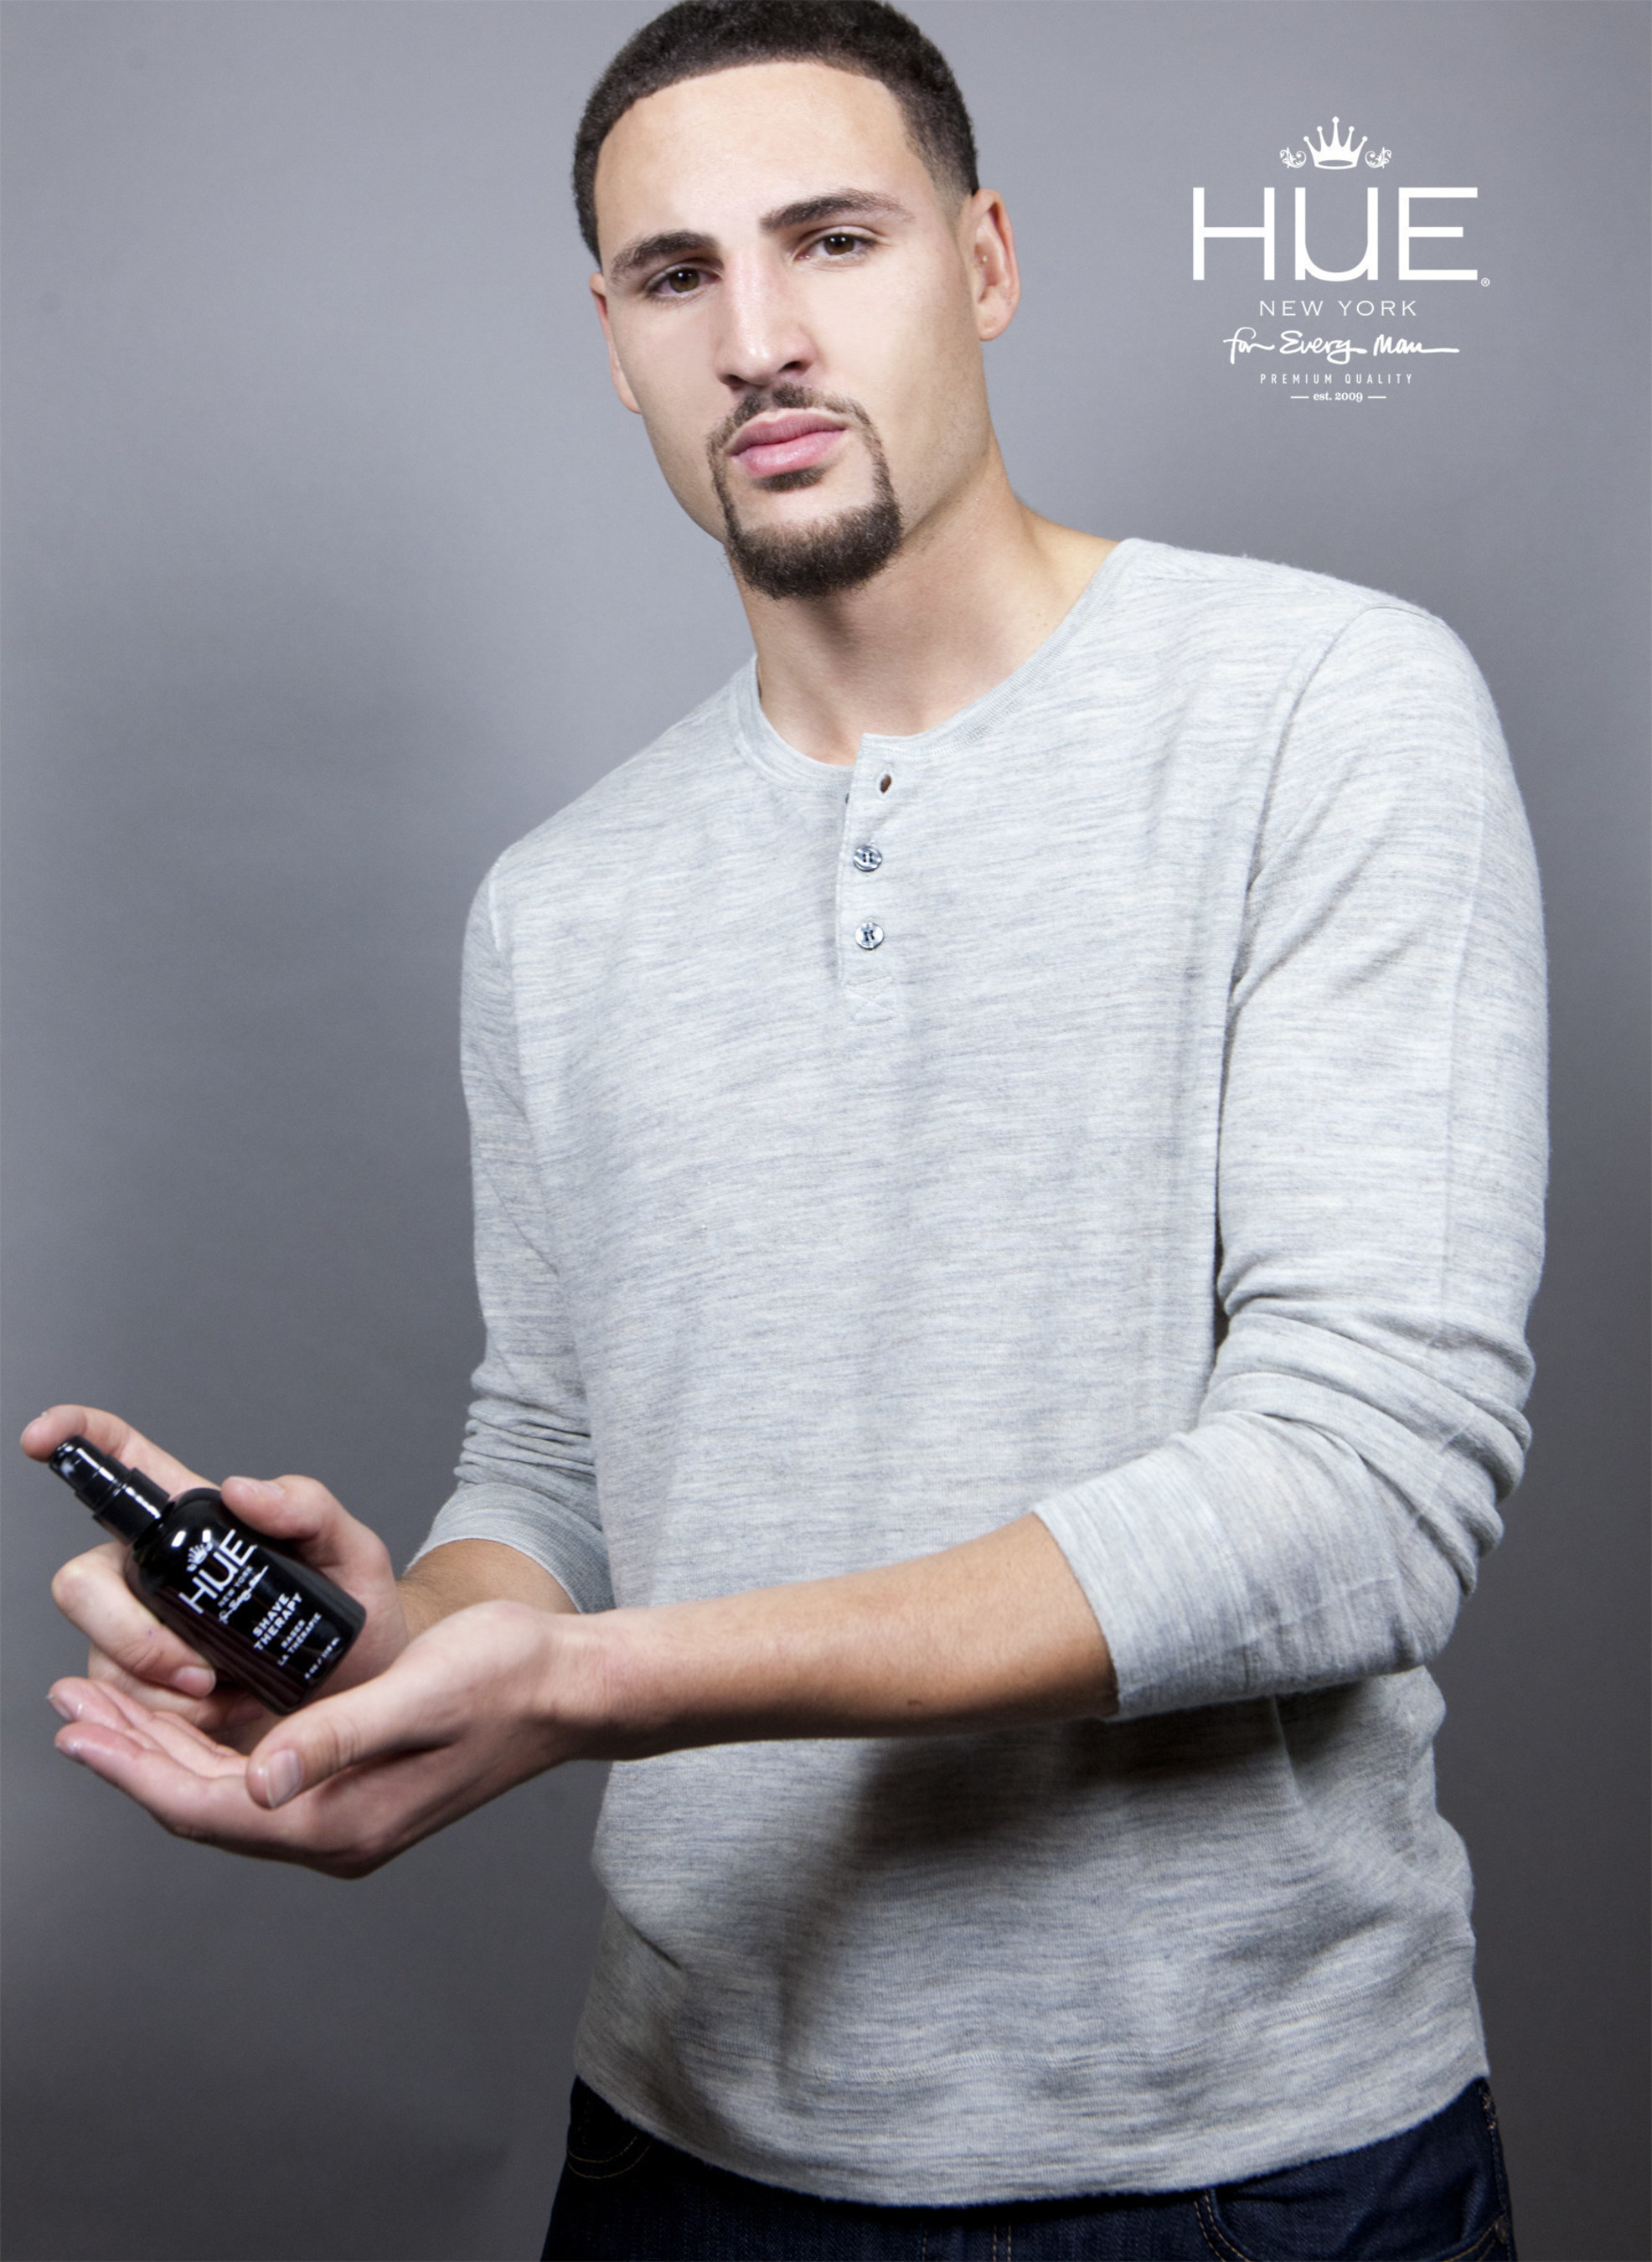 HUE for Every Man announces Professional Basketball Player, Klay Thompson, as brand ambassador for their men's luxury grooming line. Celebrate every man of every hue with the first premium multicultural men's hair and skin product line. HUE is formulated to meet the needs of an evolving and underserved multicultural market, however, their 21st Century approach to men's grooming fused with natural ingredients allow their products to work for ALL hair and skin types. HUE is truly for EVERY man!